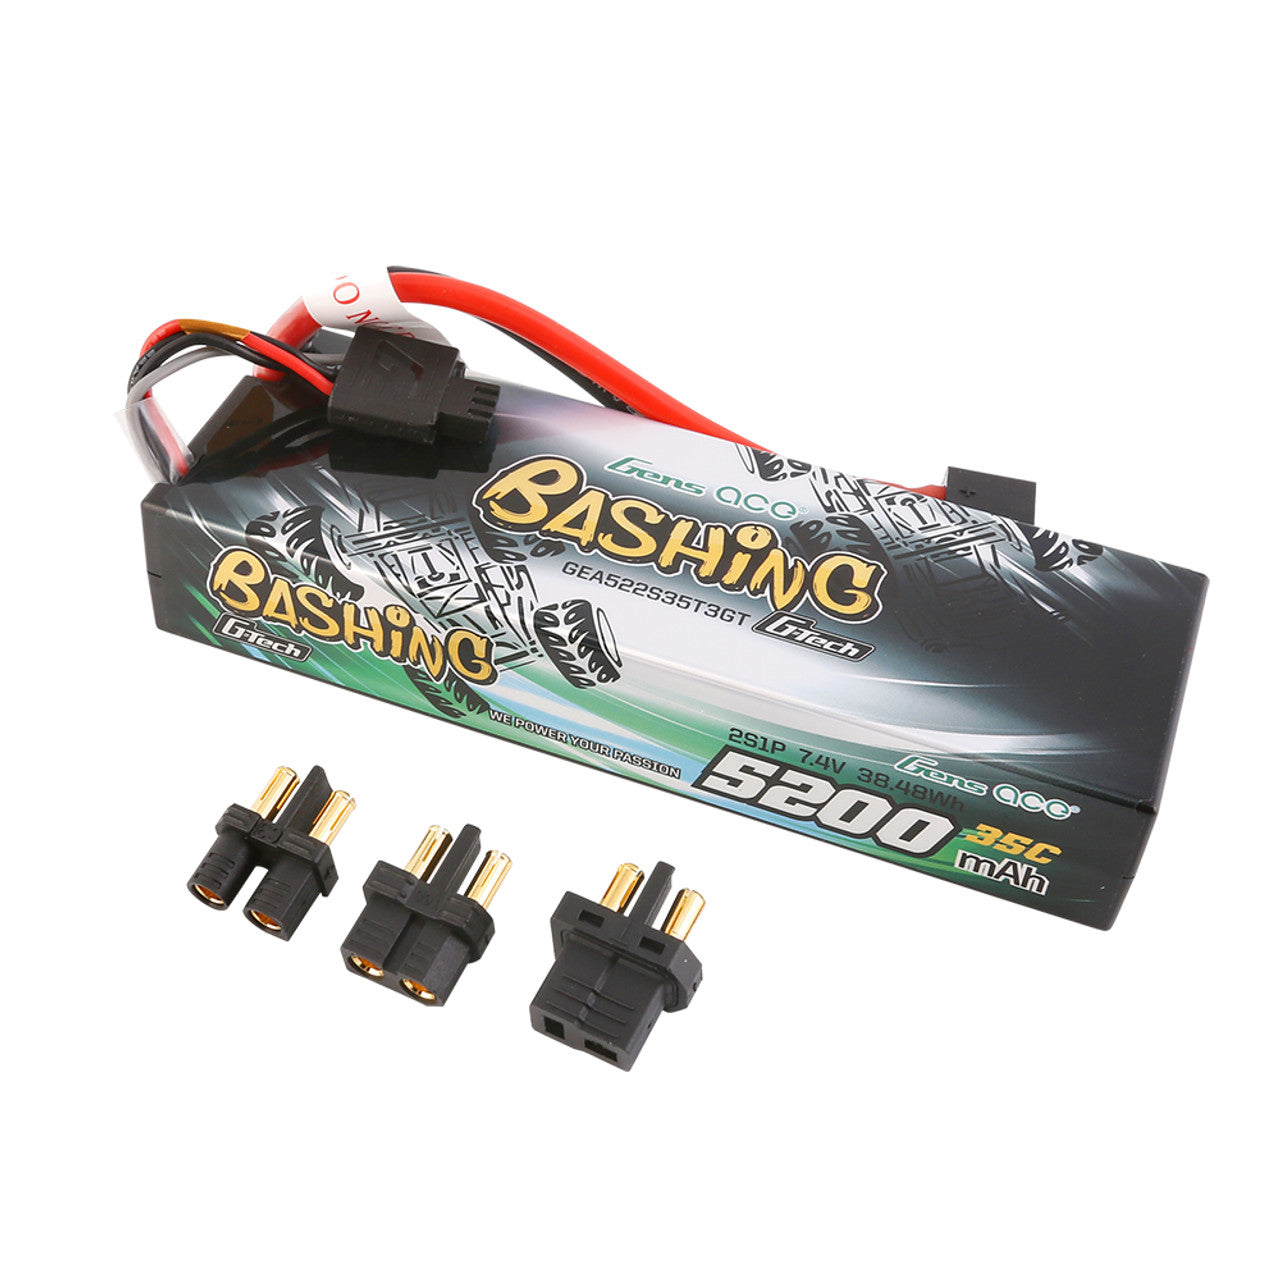 Gens Ace G-Tech Bashing Series 5200mAh 7.4V 2S1P 35C Car Lipo Battery Pack Hardcase 24# With EC3, Deans And XT60 Adapter